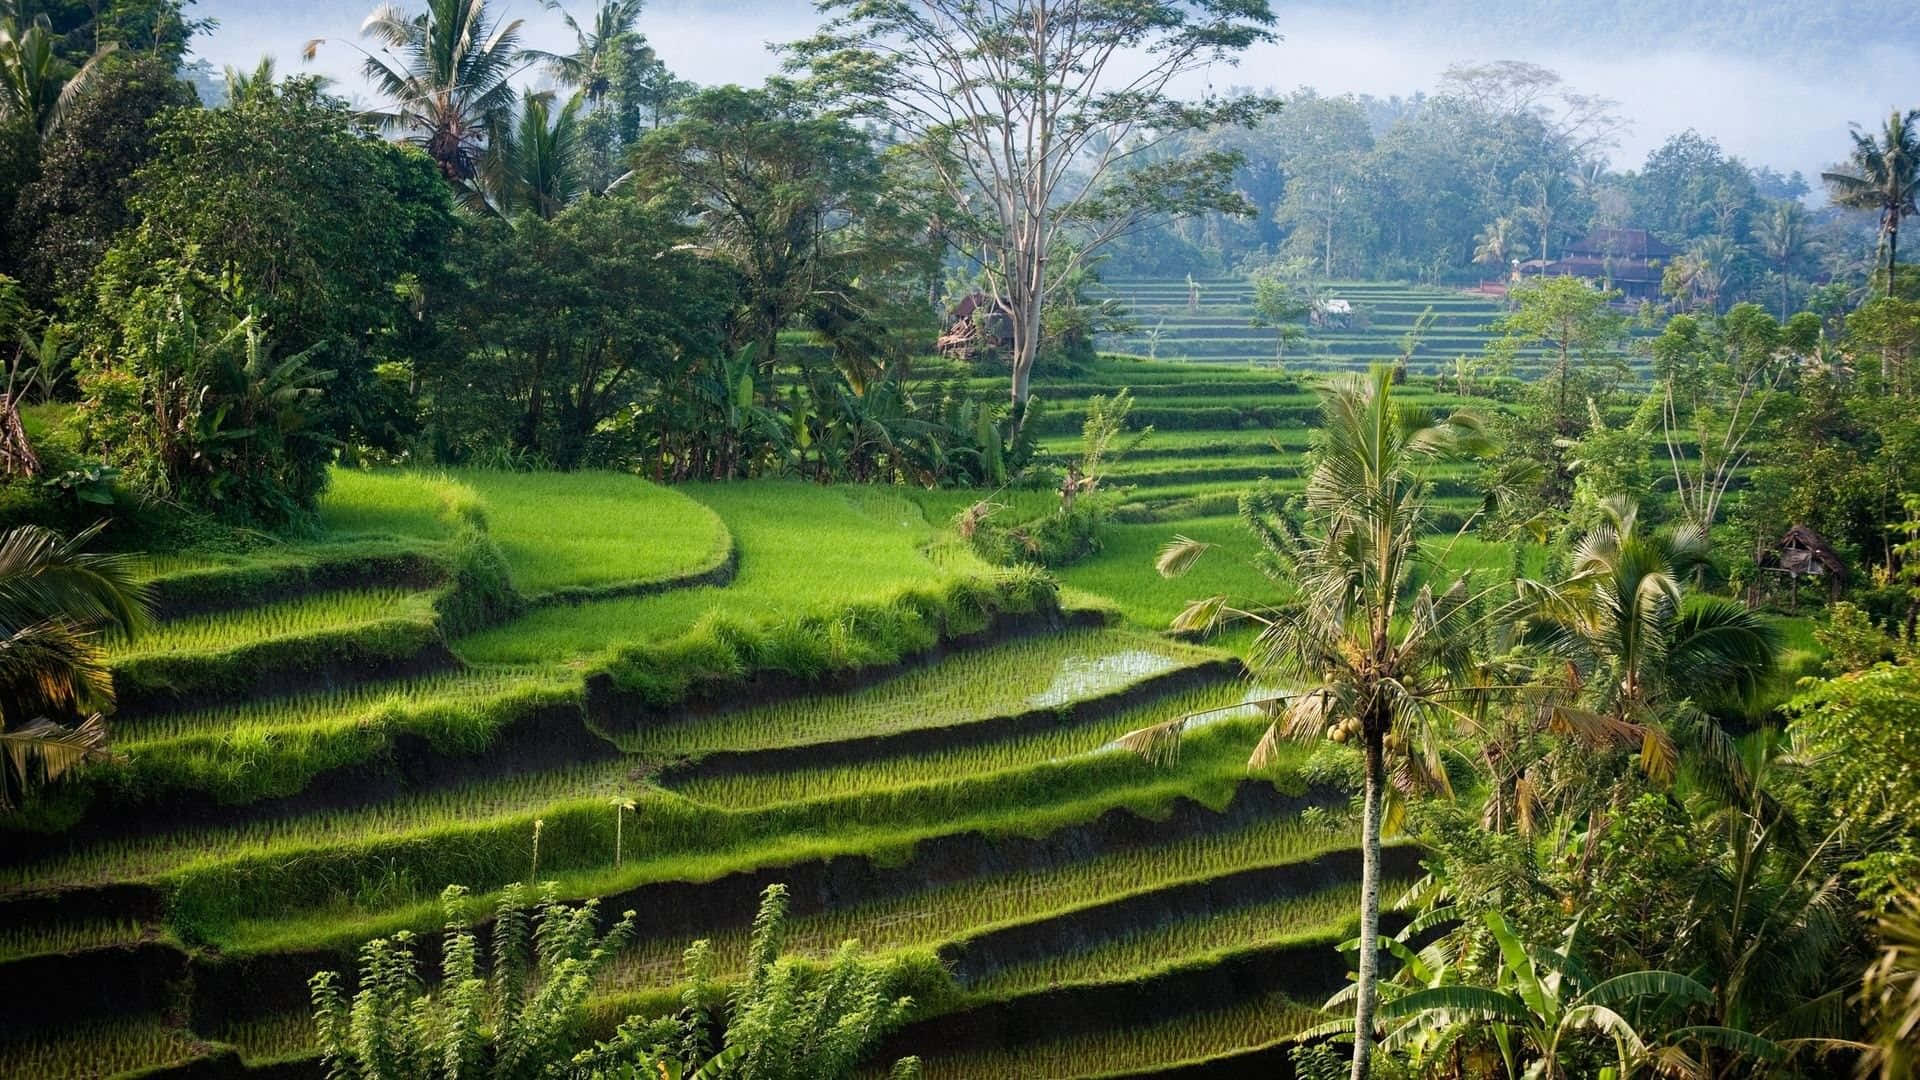 Majestic View Of Indonesia's Landscape